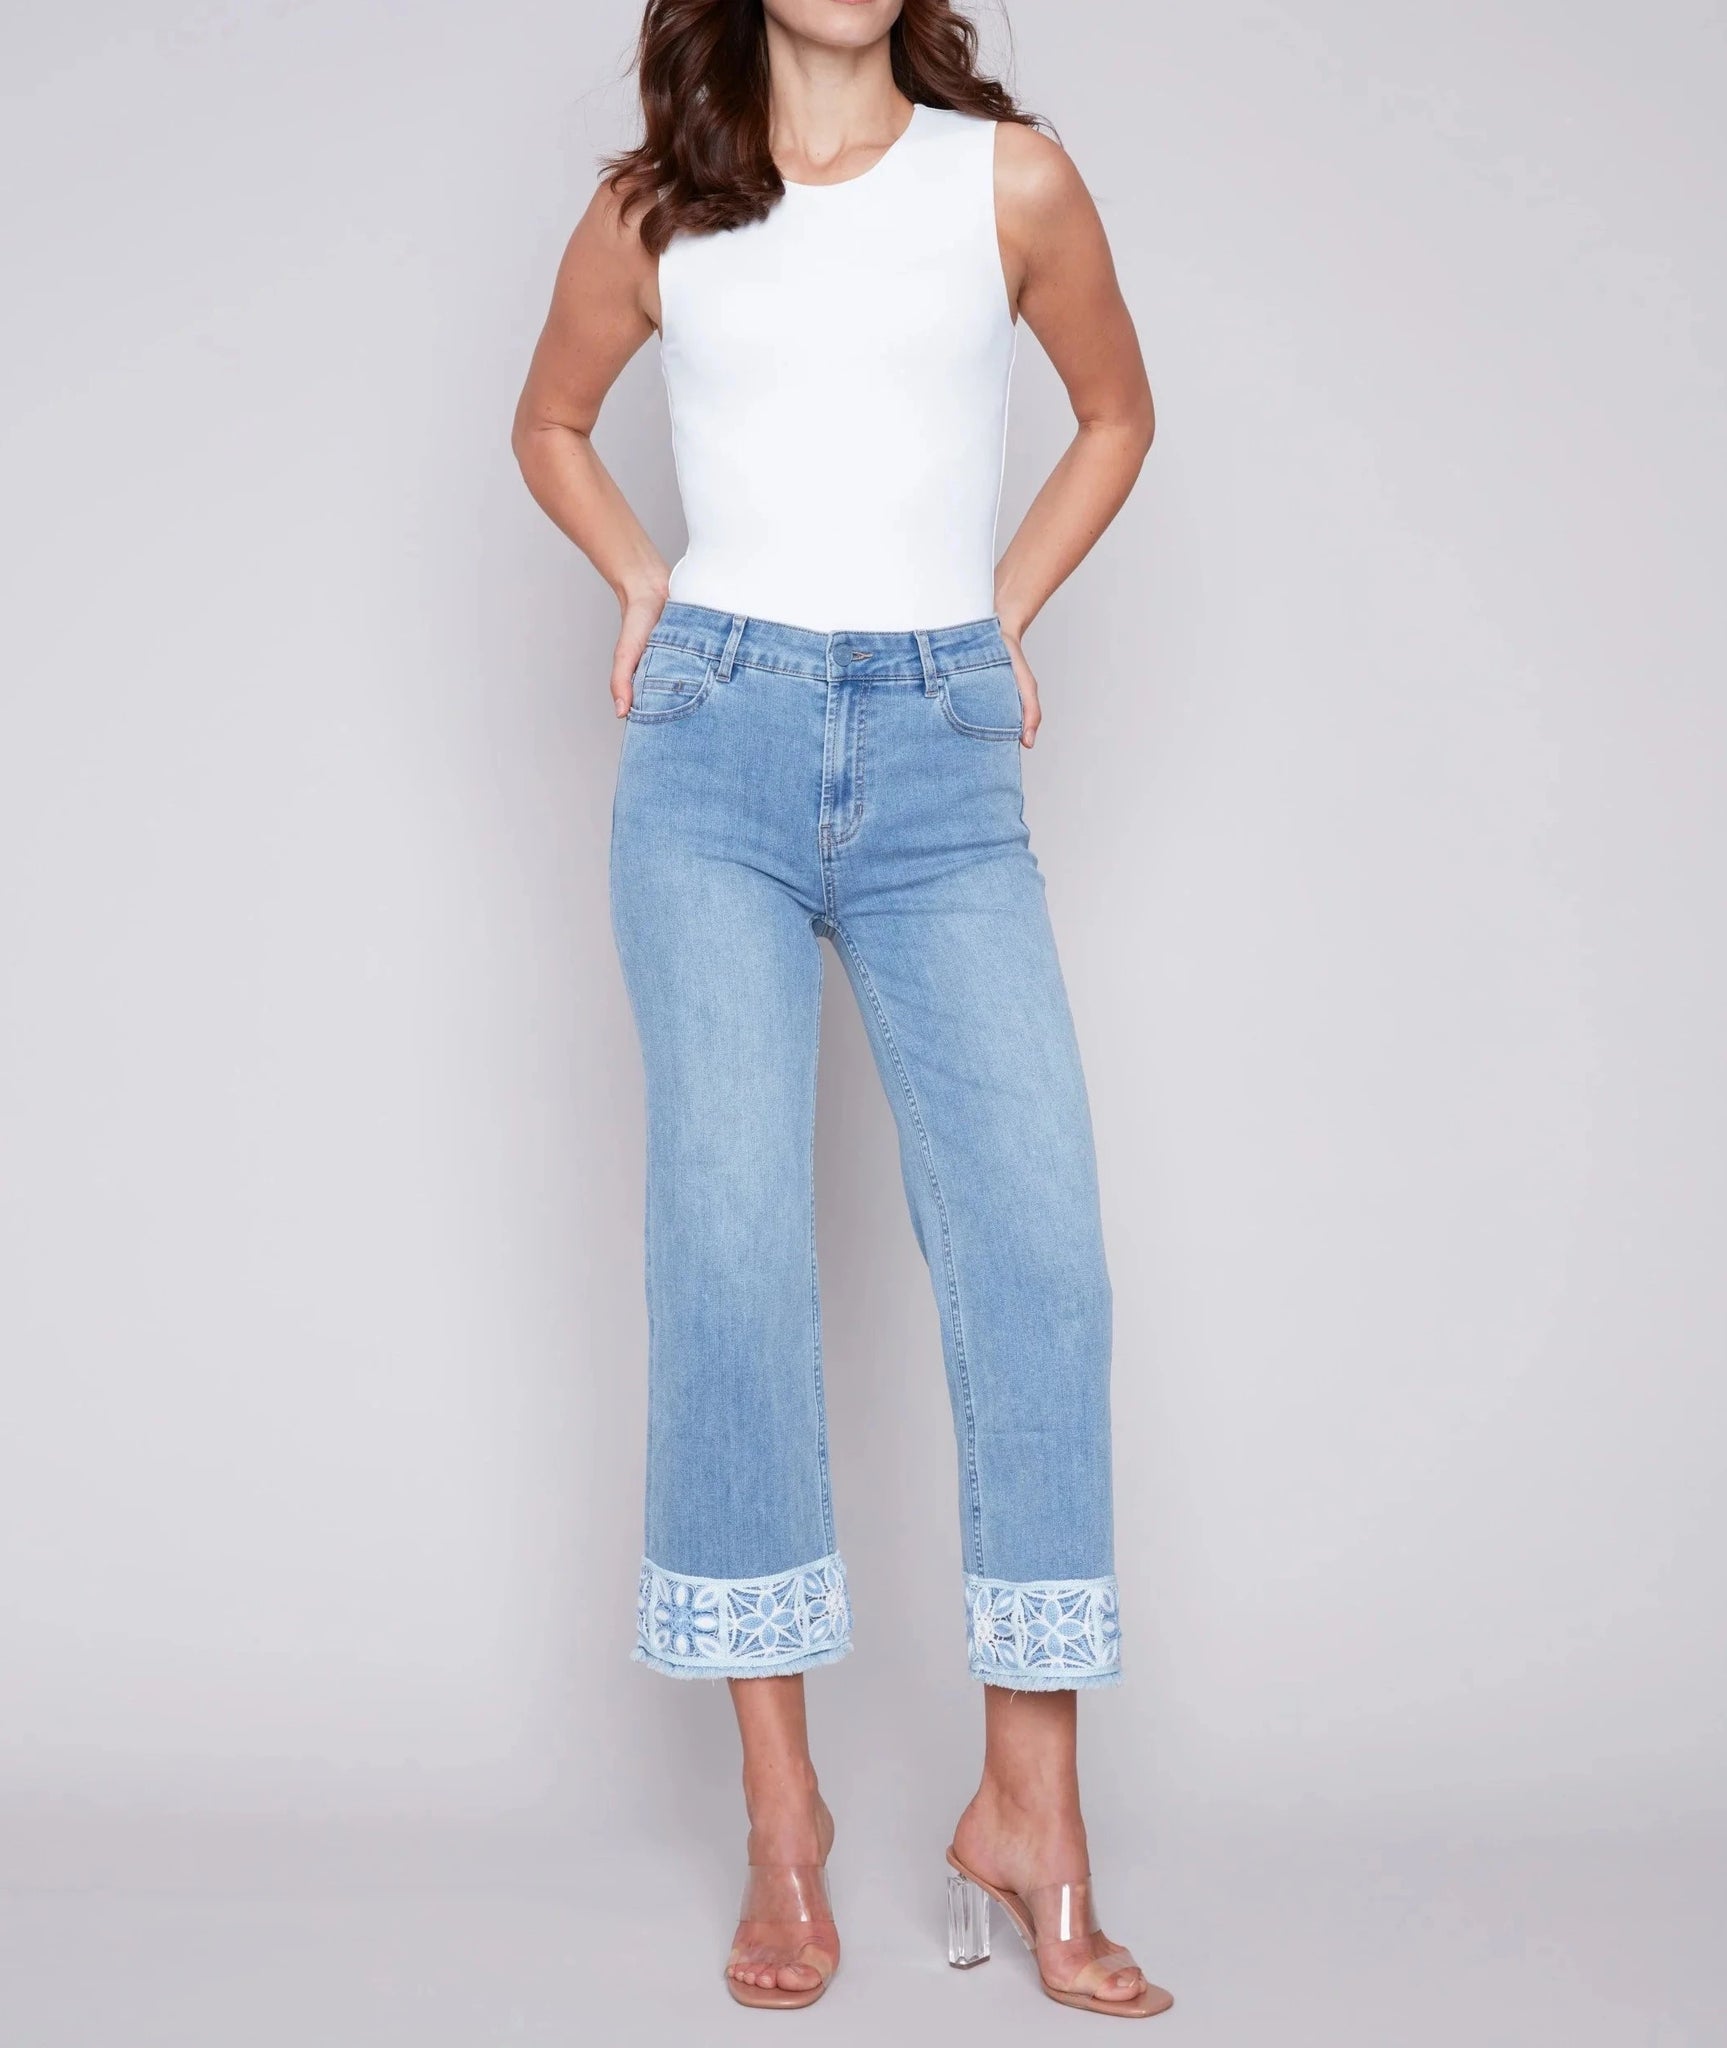 Jeans with Crochet Cuff | Light Blue